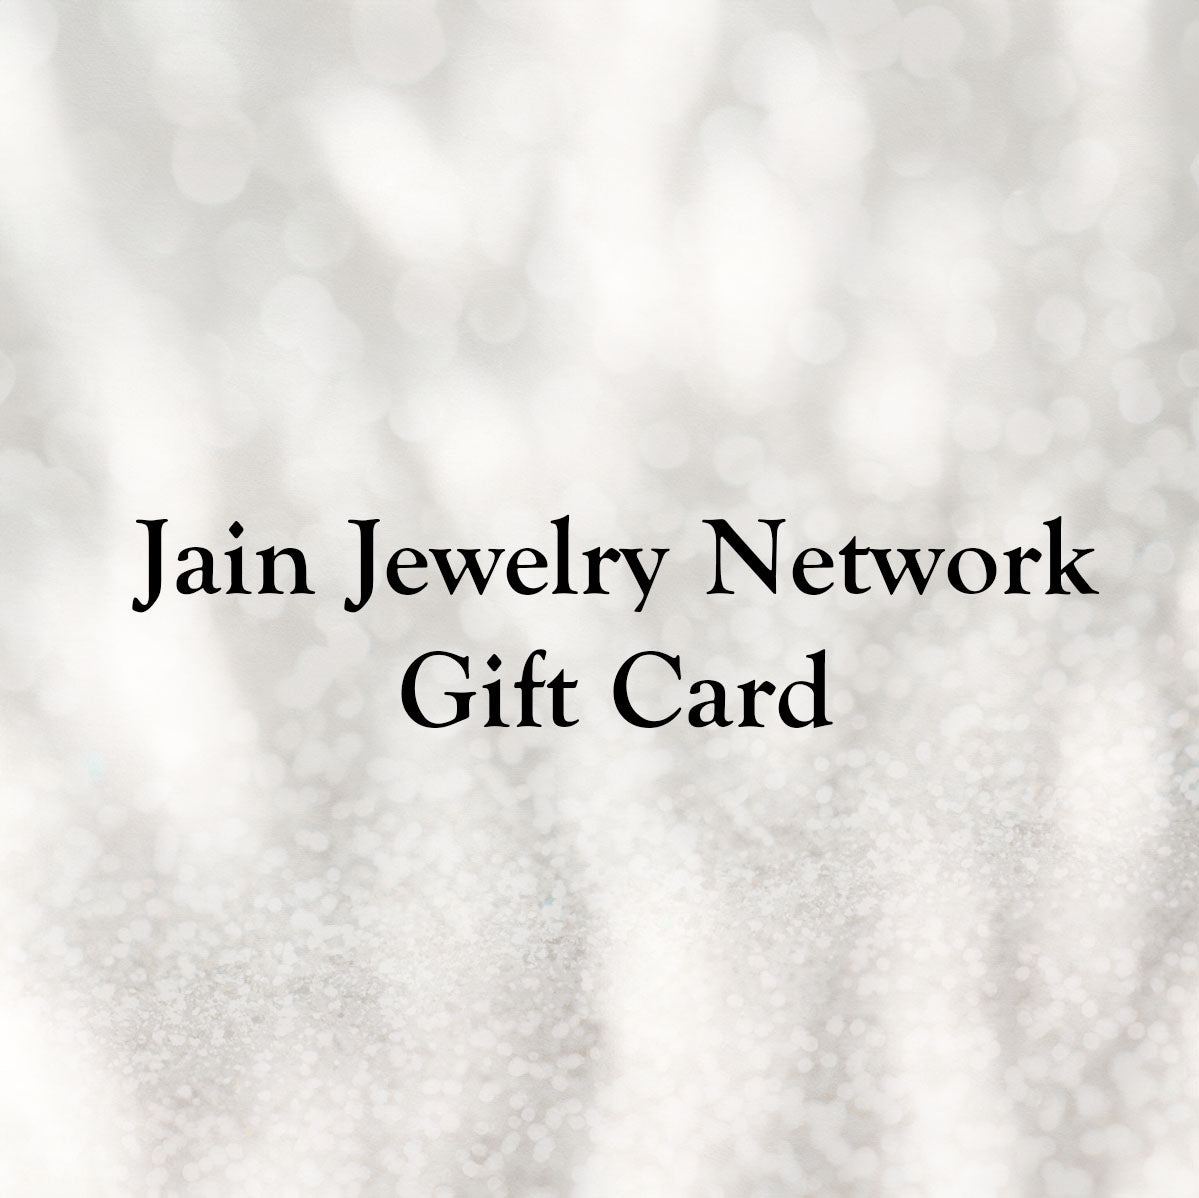 Jain Jewelry Network Gift Card - Celebrate with a Thoughtful Gift